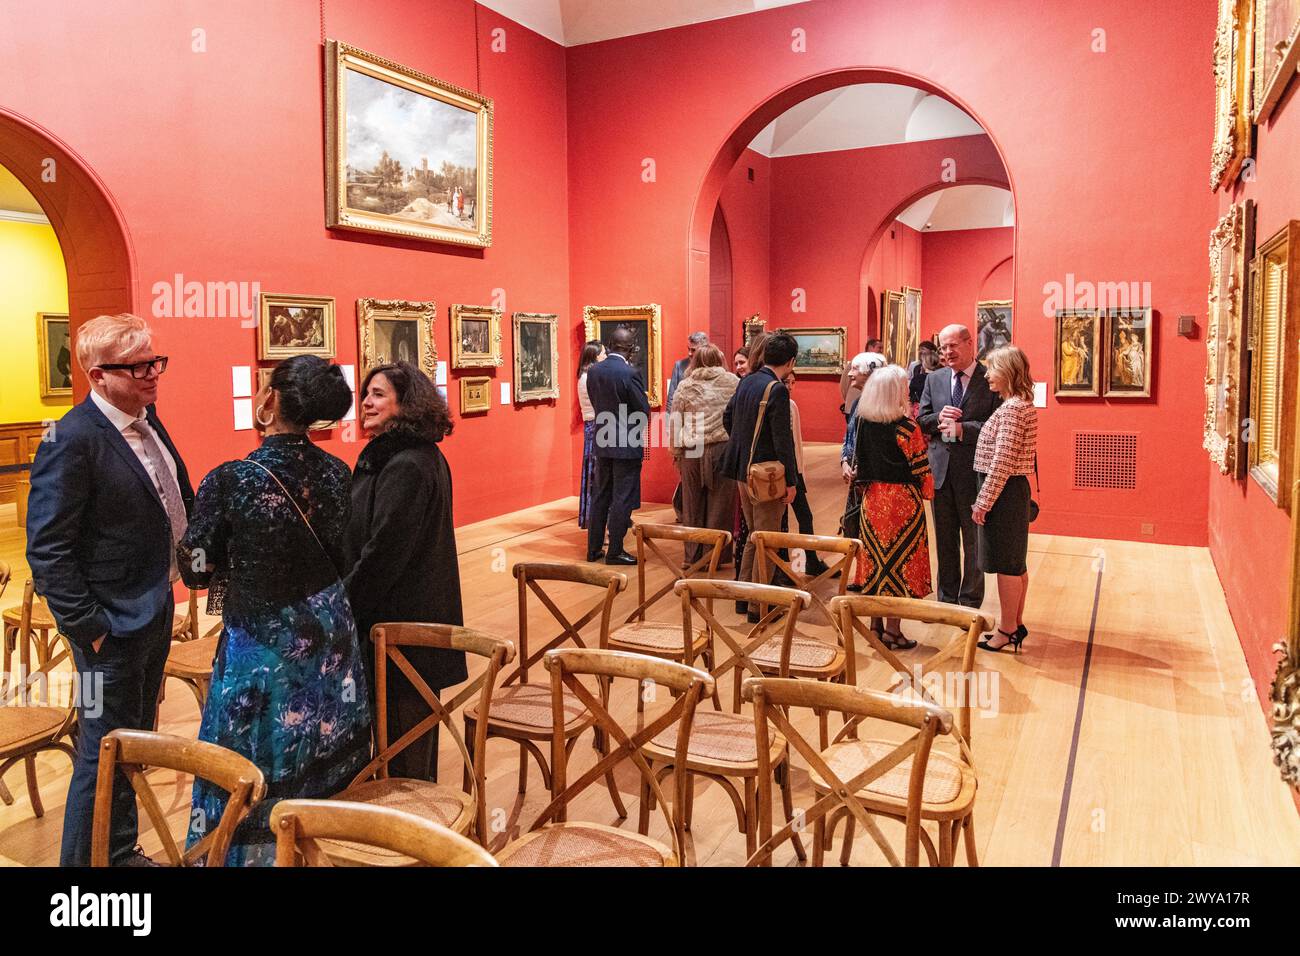 A group of wedding guests congregated in the main gallery of Dulwich Picture Gallery in London, UK Stock Photo